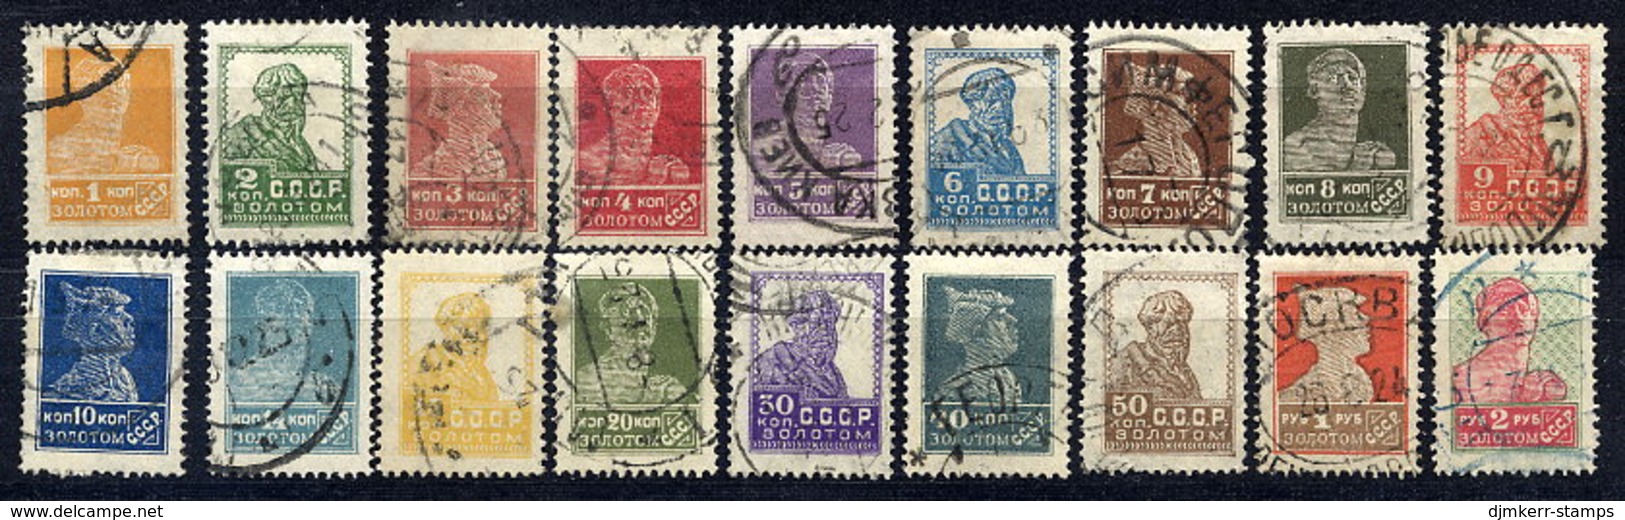 SOVIET UNION 1924-25 Definitive Complete To 2 R. Without Watermark Perforated 14½:14¾, Used.  Michel 242 I A - 259 I A. - Usados